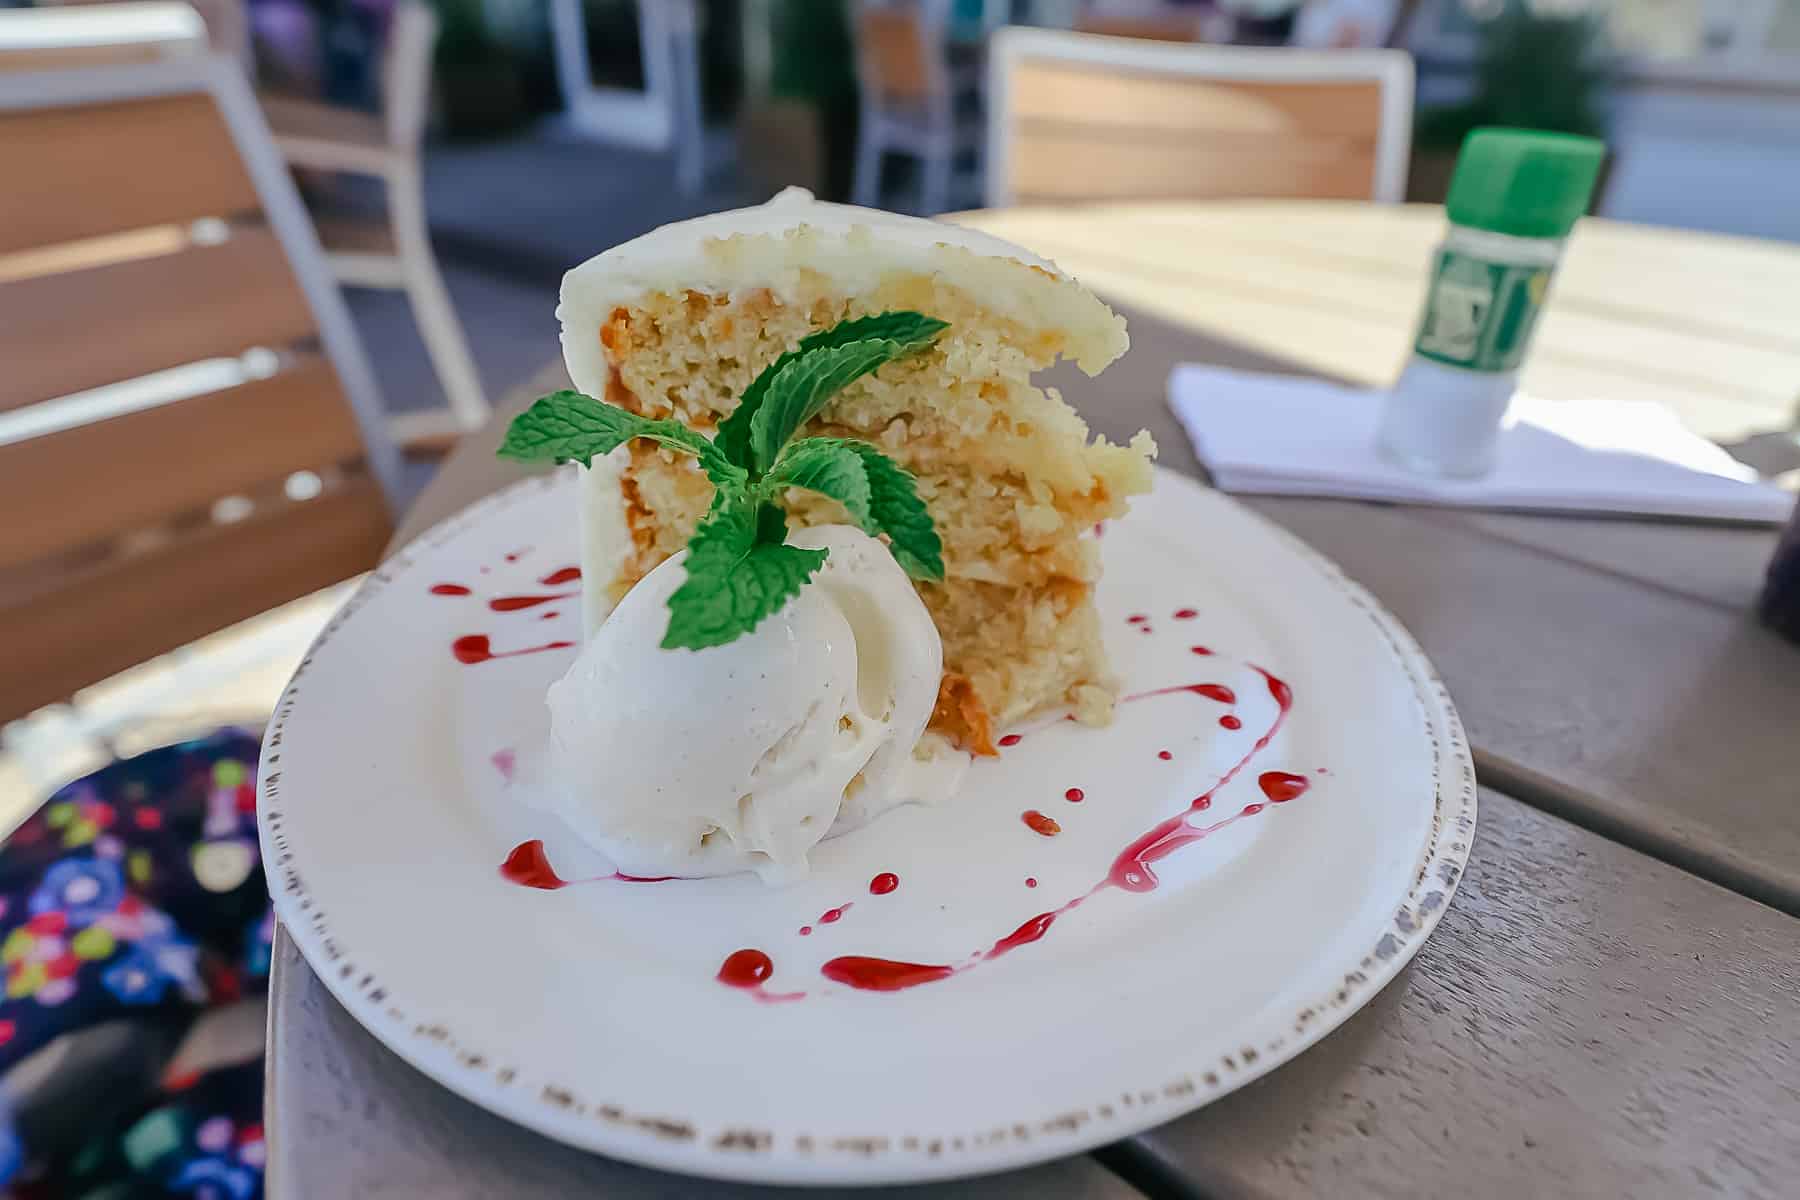 Hummingbird Cake is one of the best desserts at Disney Springs 